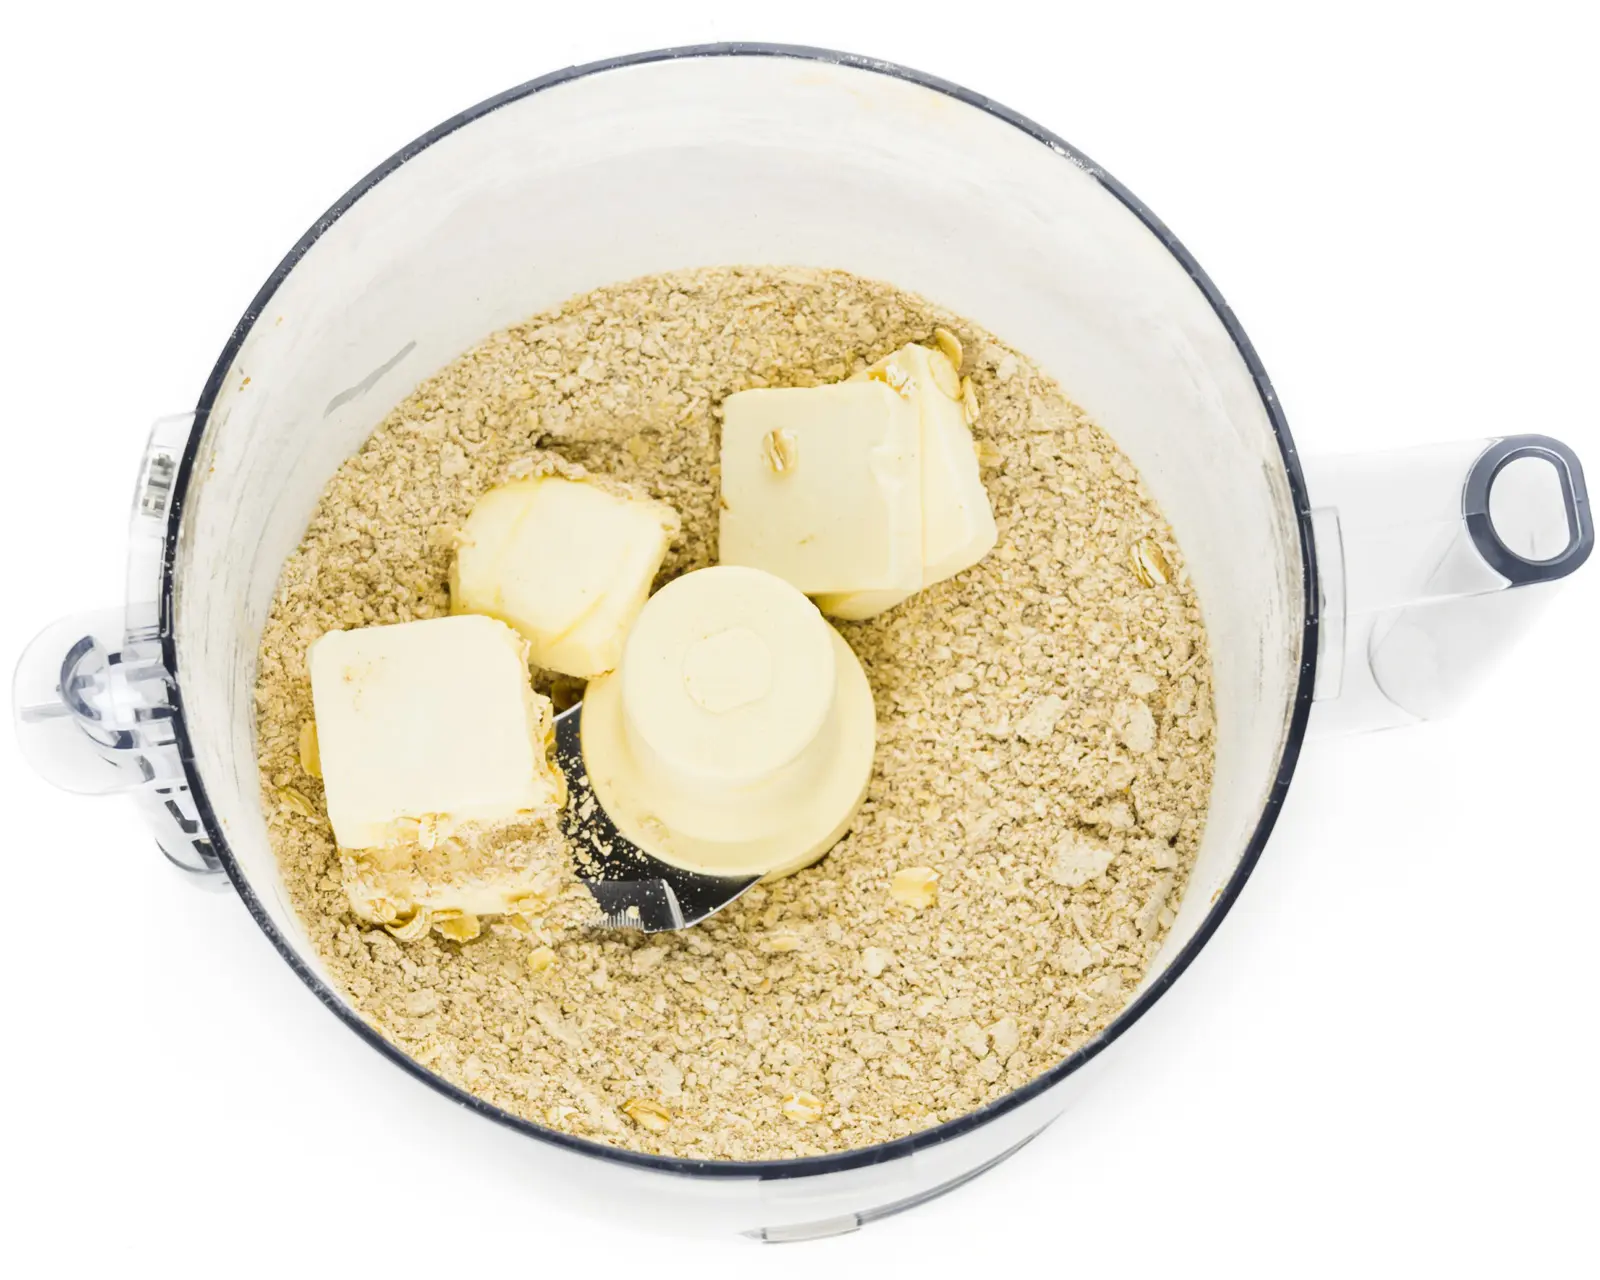 Vegan butter cubes have been added to an oat flour mixture in a food processor.